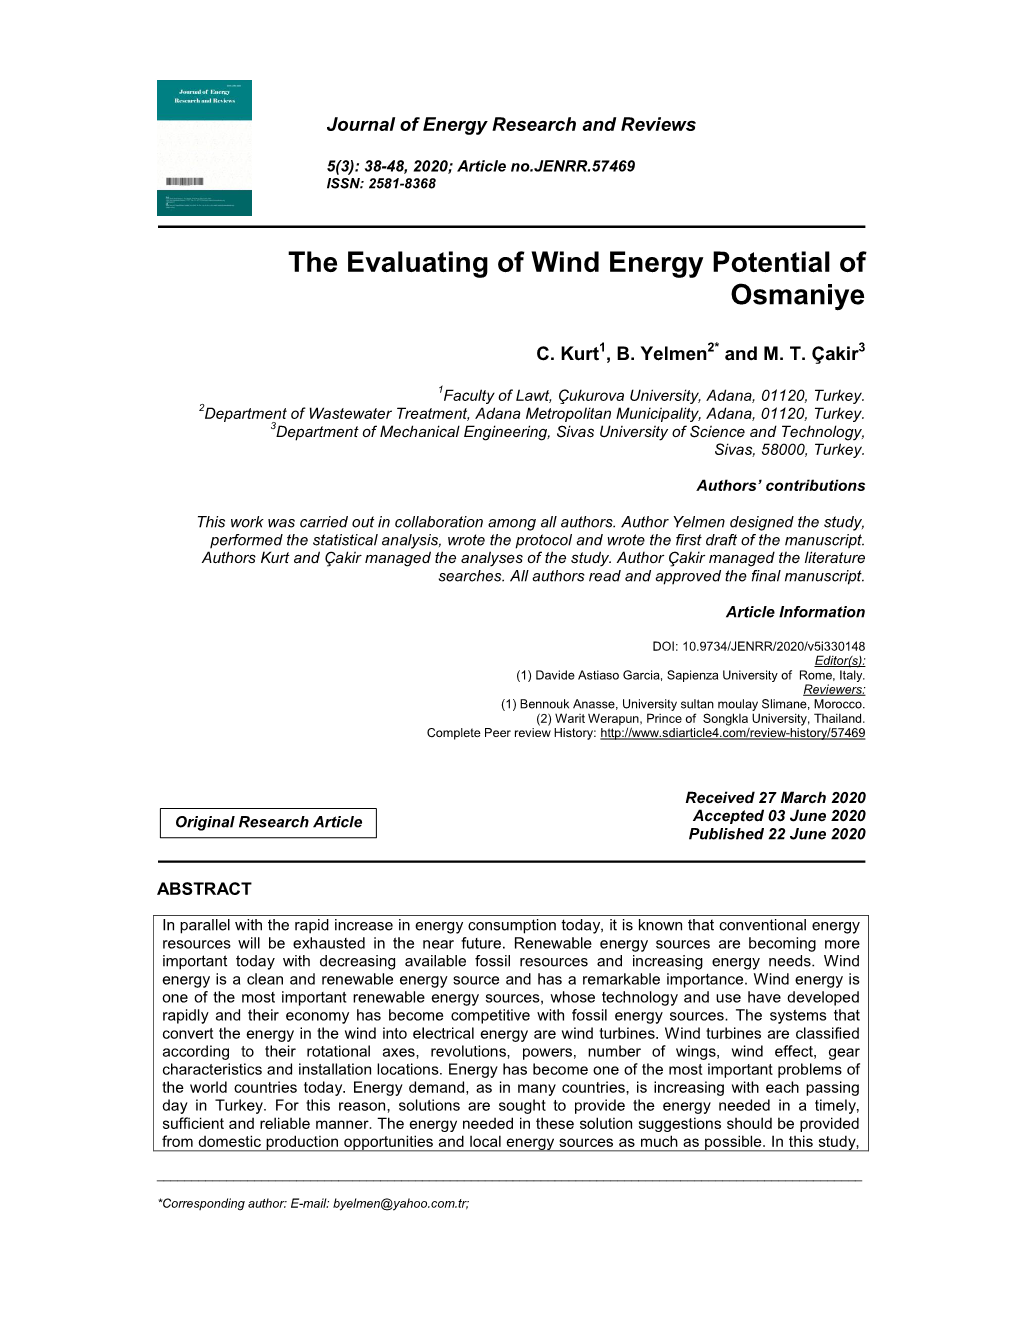 The Evaluating of Wind Energy Potential of Osmaniye